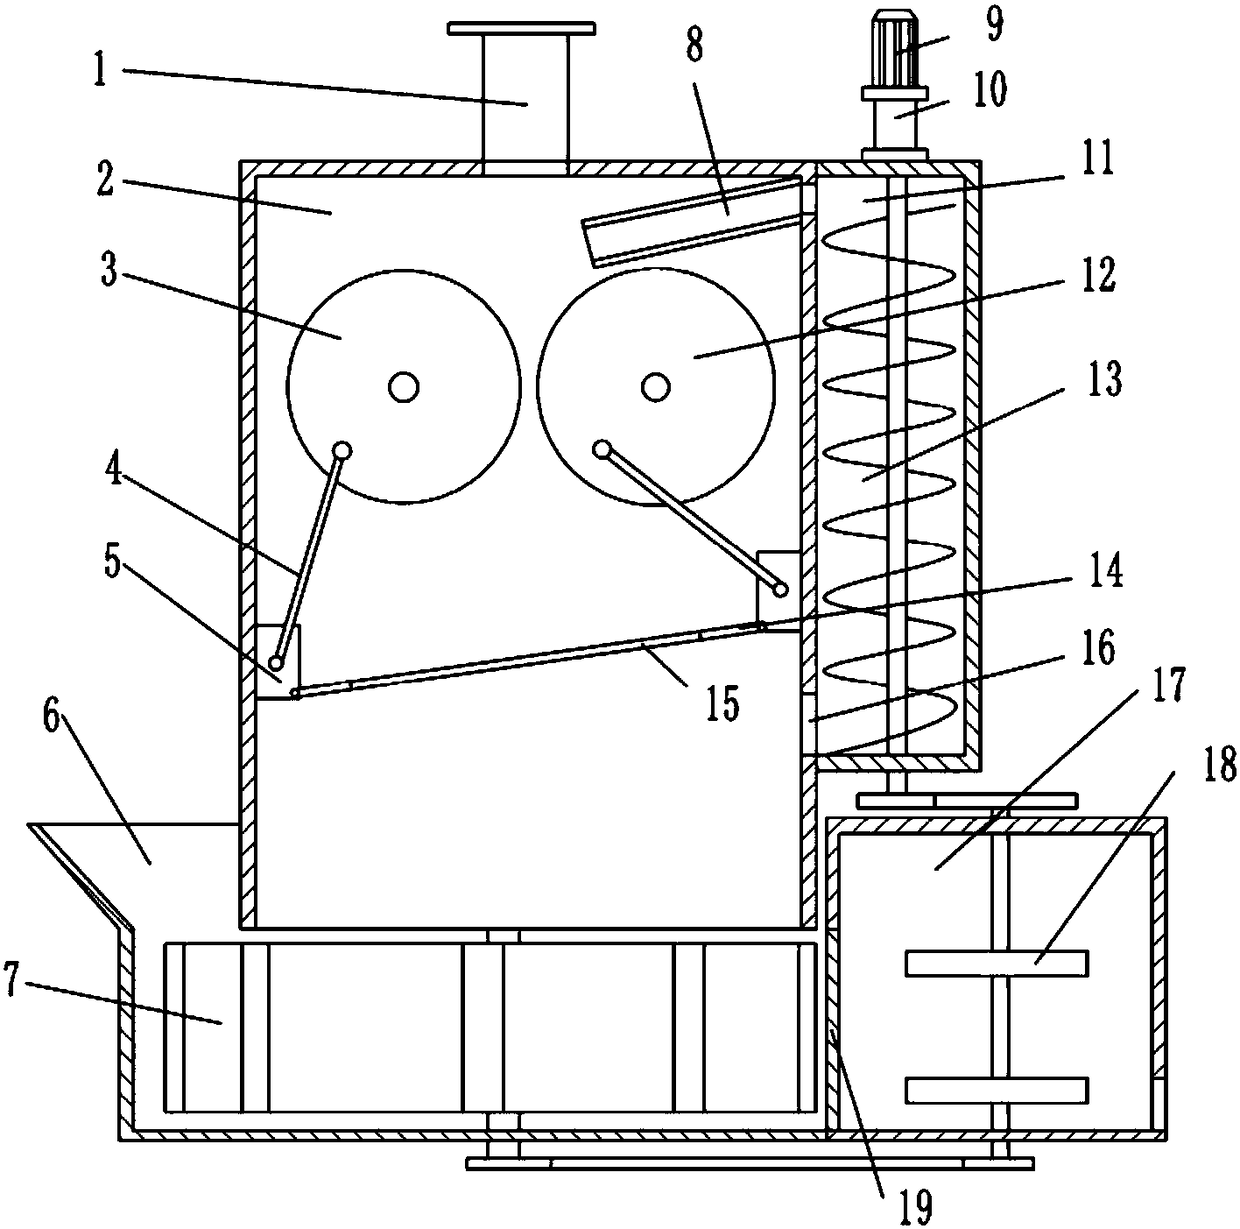 Heat-preservation material mixing device